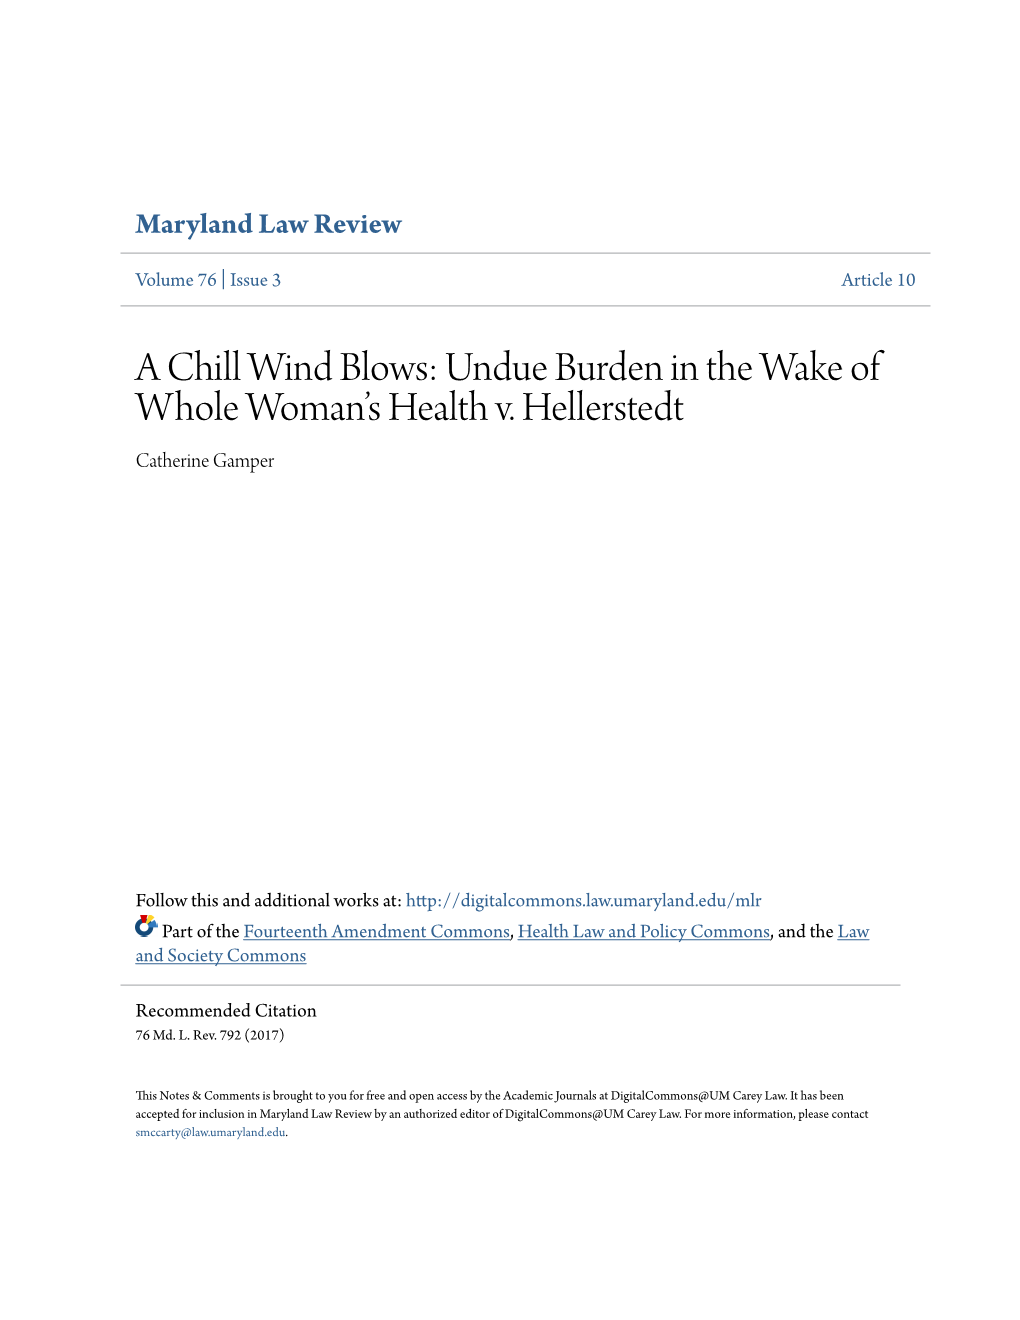 A Chill Wind Blows: Undue Burden in the Wake of Whole Woman's Health